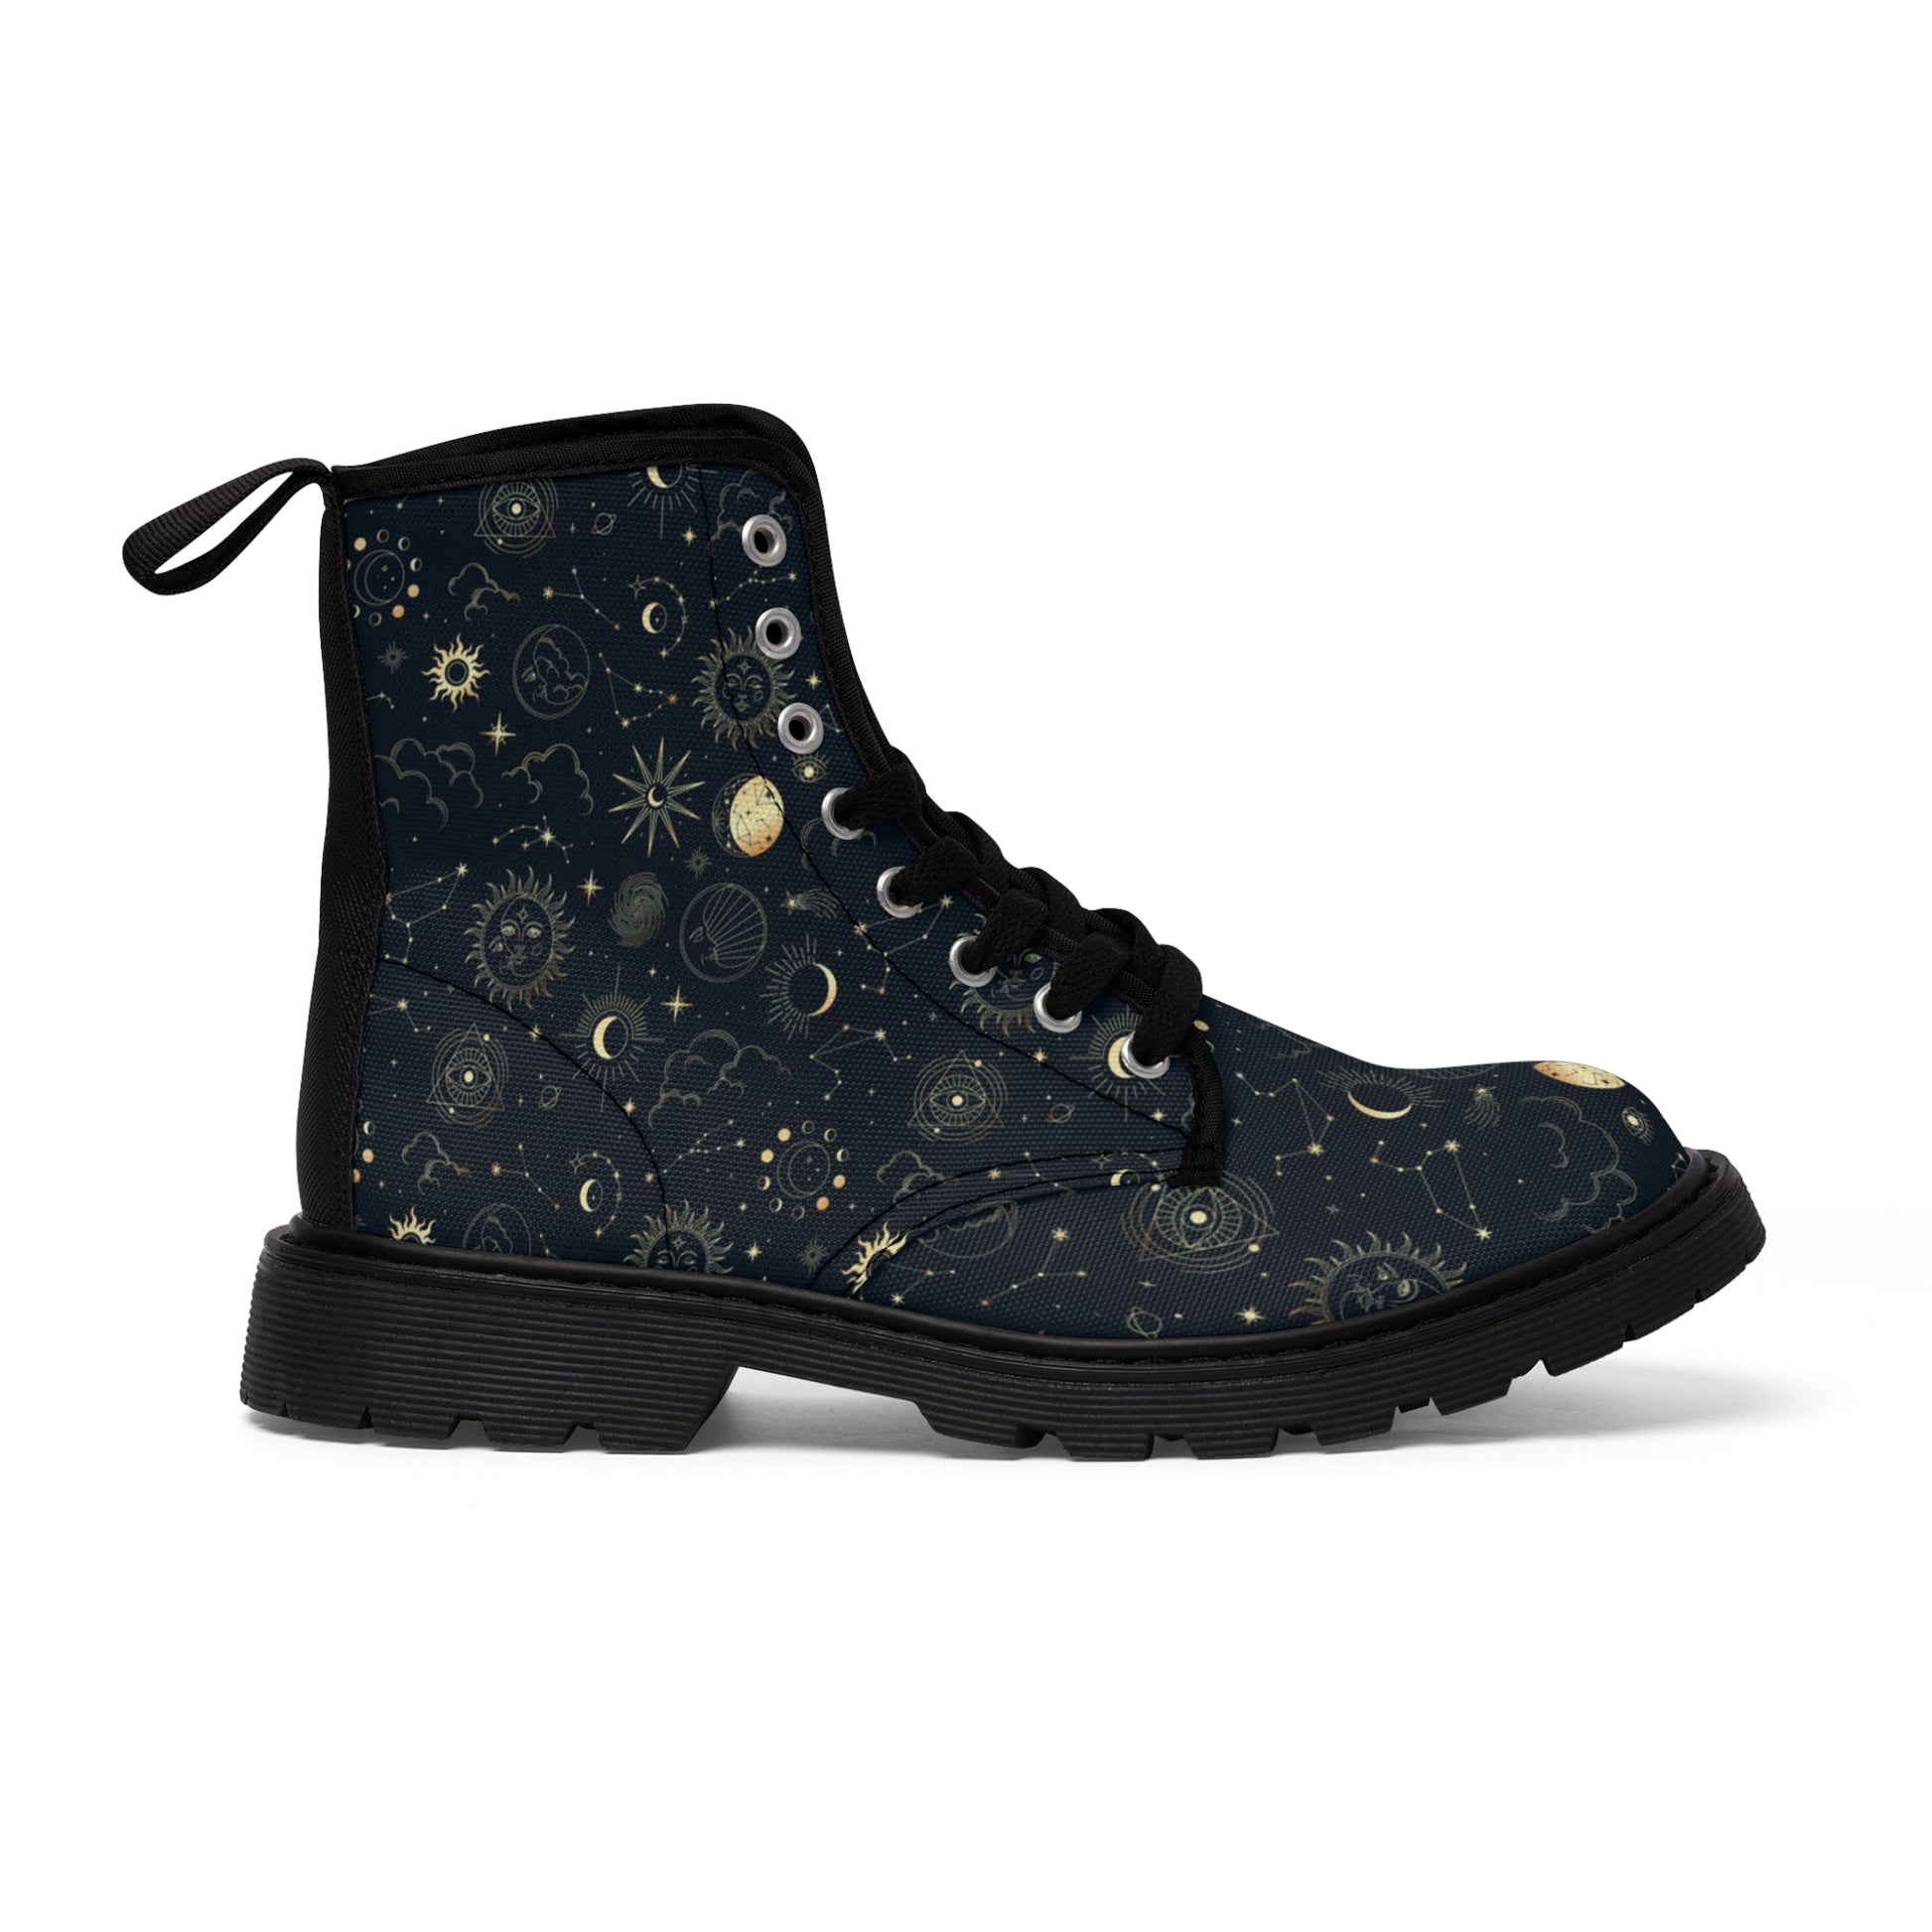 Shoes - WOMEN'S "CELESTIALS" Sun Moon Star Boots - Canvas Print Boots with Rubber Souls - PUNKER WEAR - GOTH from Crypto Zoo Tees